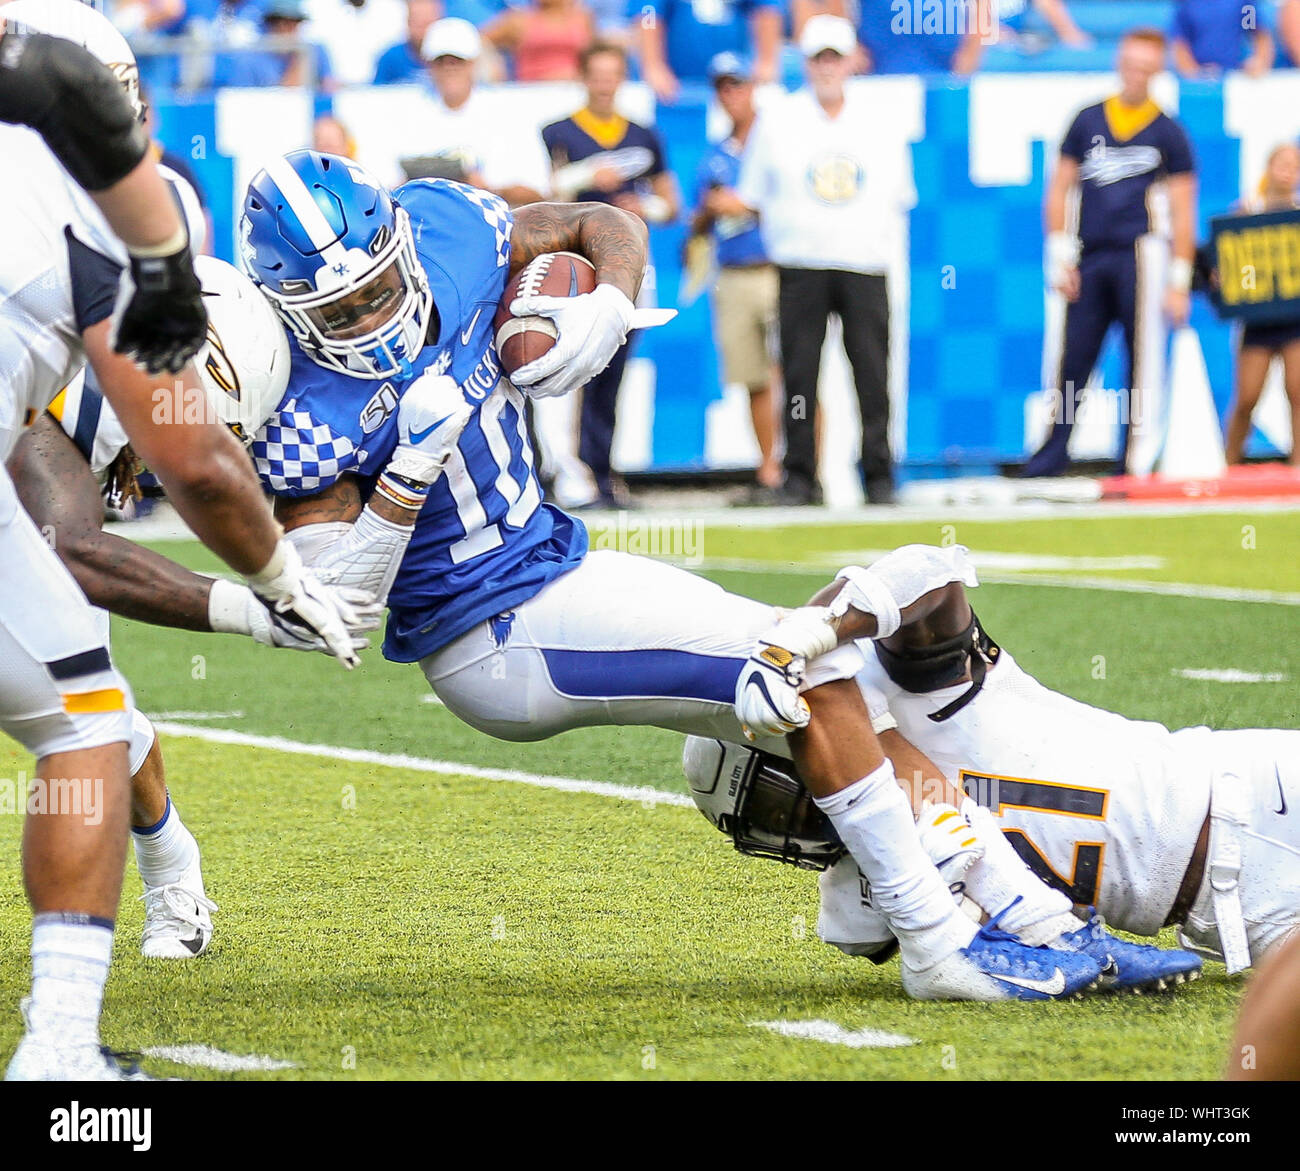 August 31, 2019: Kentucky's A.J. Rose Jr. #10 pushes forward for extra yardage during the NCAA football game between the Kentucky Wildcats and the Toledo Rockets at Kroger Field in Lexington, KY. Kyle Okita/CSM Stock Photo